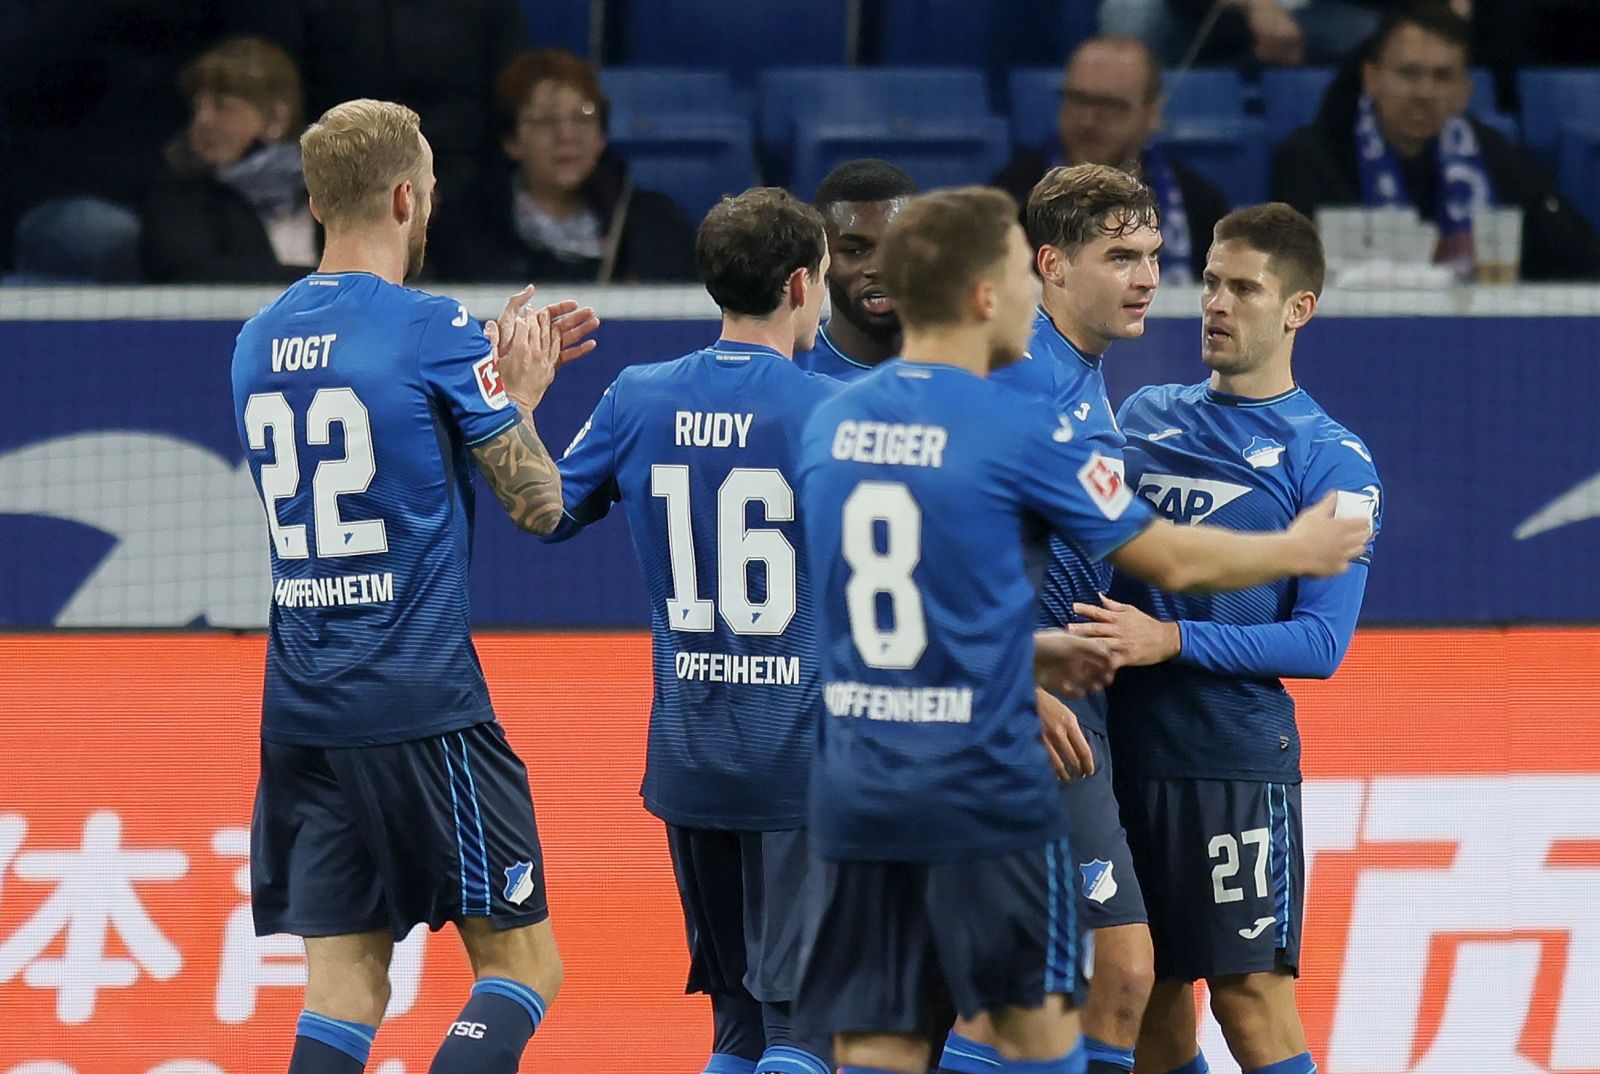 epa09552827 Hoffenheim's Andrej Kramaric (R) celebrates with teammates after scoring the opening goal during the German Bundesliga soccer match between TSG 1899 Hoffenheim and Hertha BSC Berlin in Sinsheim, Germany, 29 October 2021.  EPA/RONALD WITTEK CONDITIONS - ATTENTION: The DFL regulations prohibit any use of photographs as image sequences and/or quasi-video.